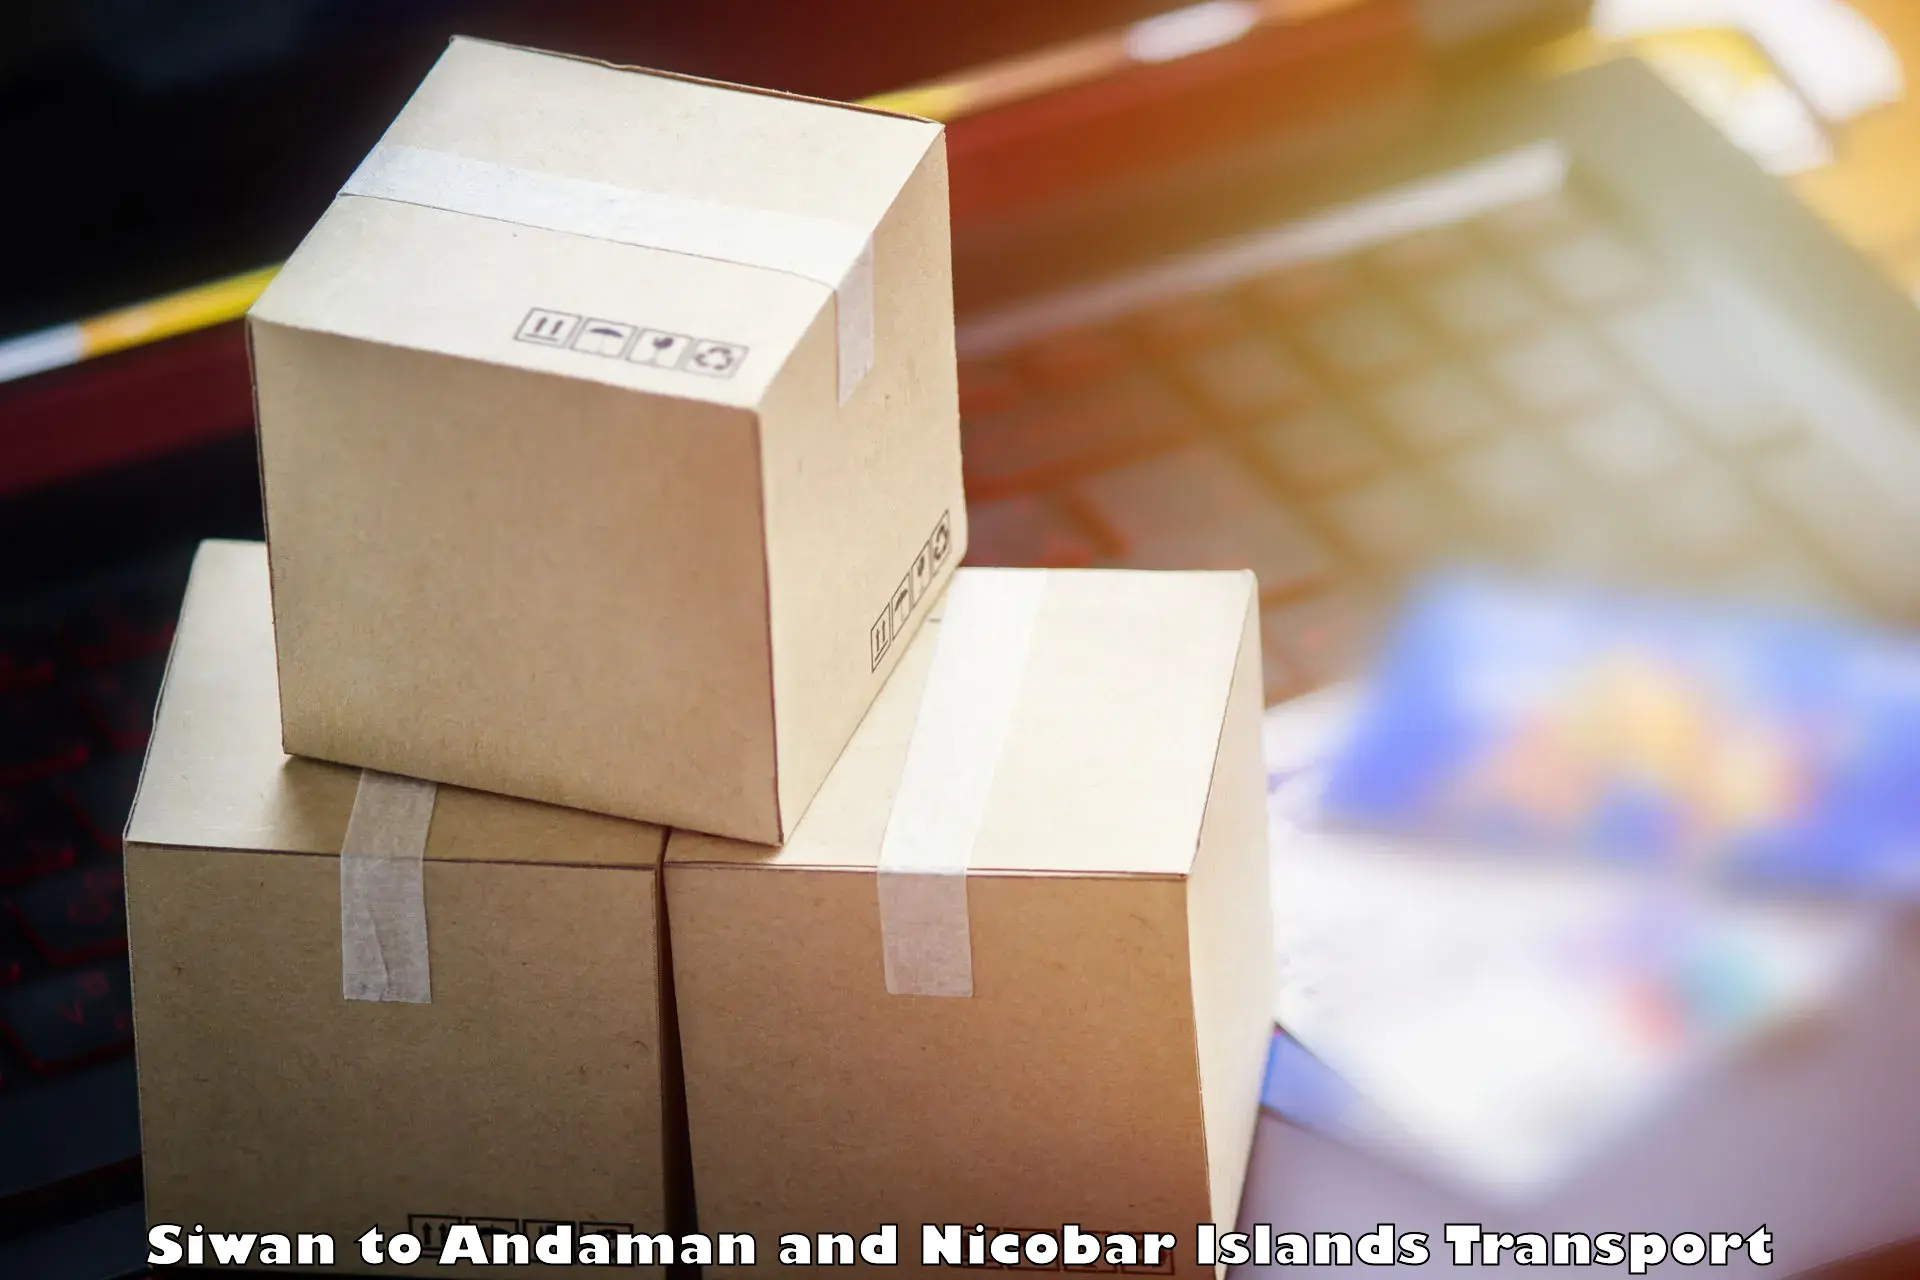 Land transport services in Siwan to Andaman and Nicobar Islands